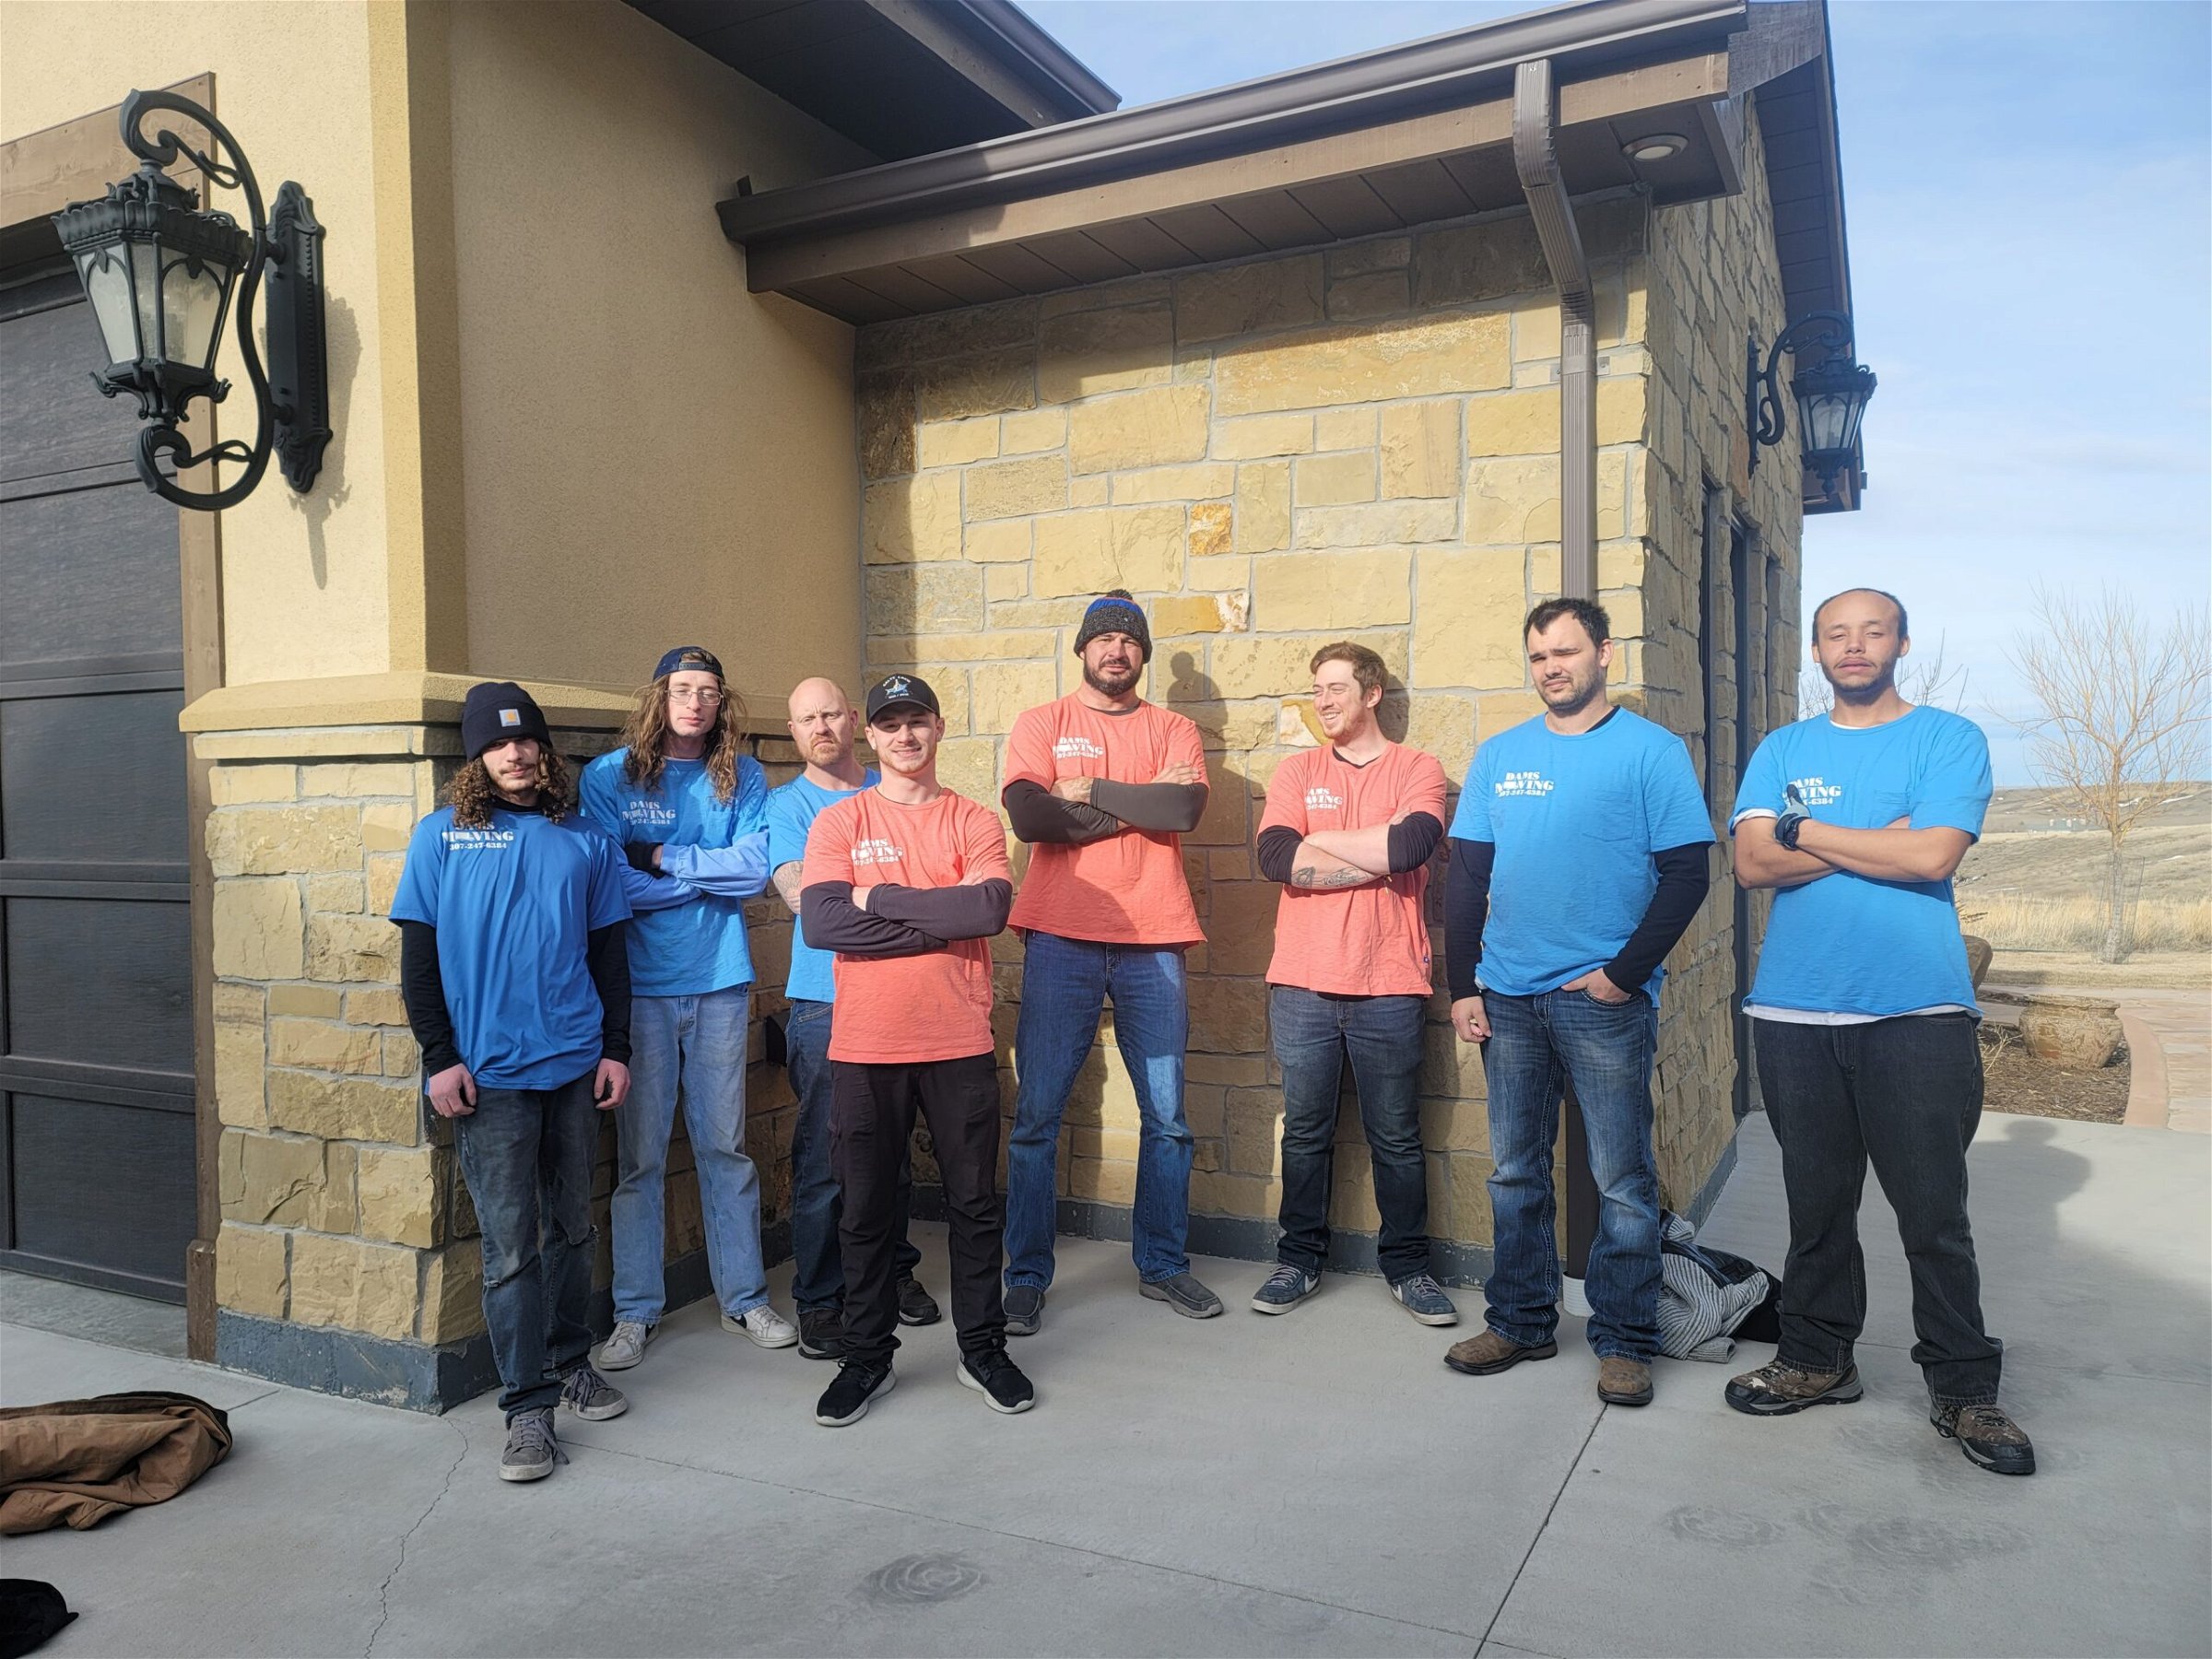 A group of people in blue shirts from Dams Moving Company in Casper Wyoming standing in front of a house, providing moving services.